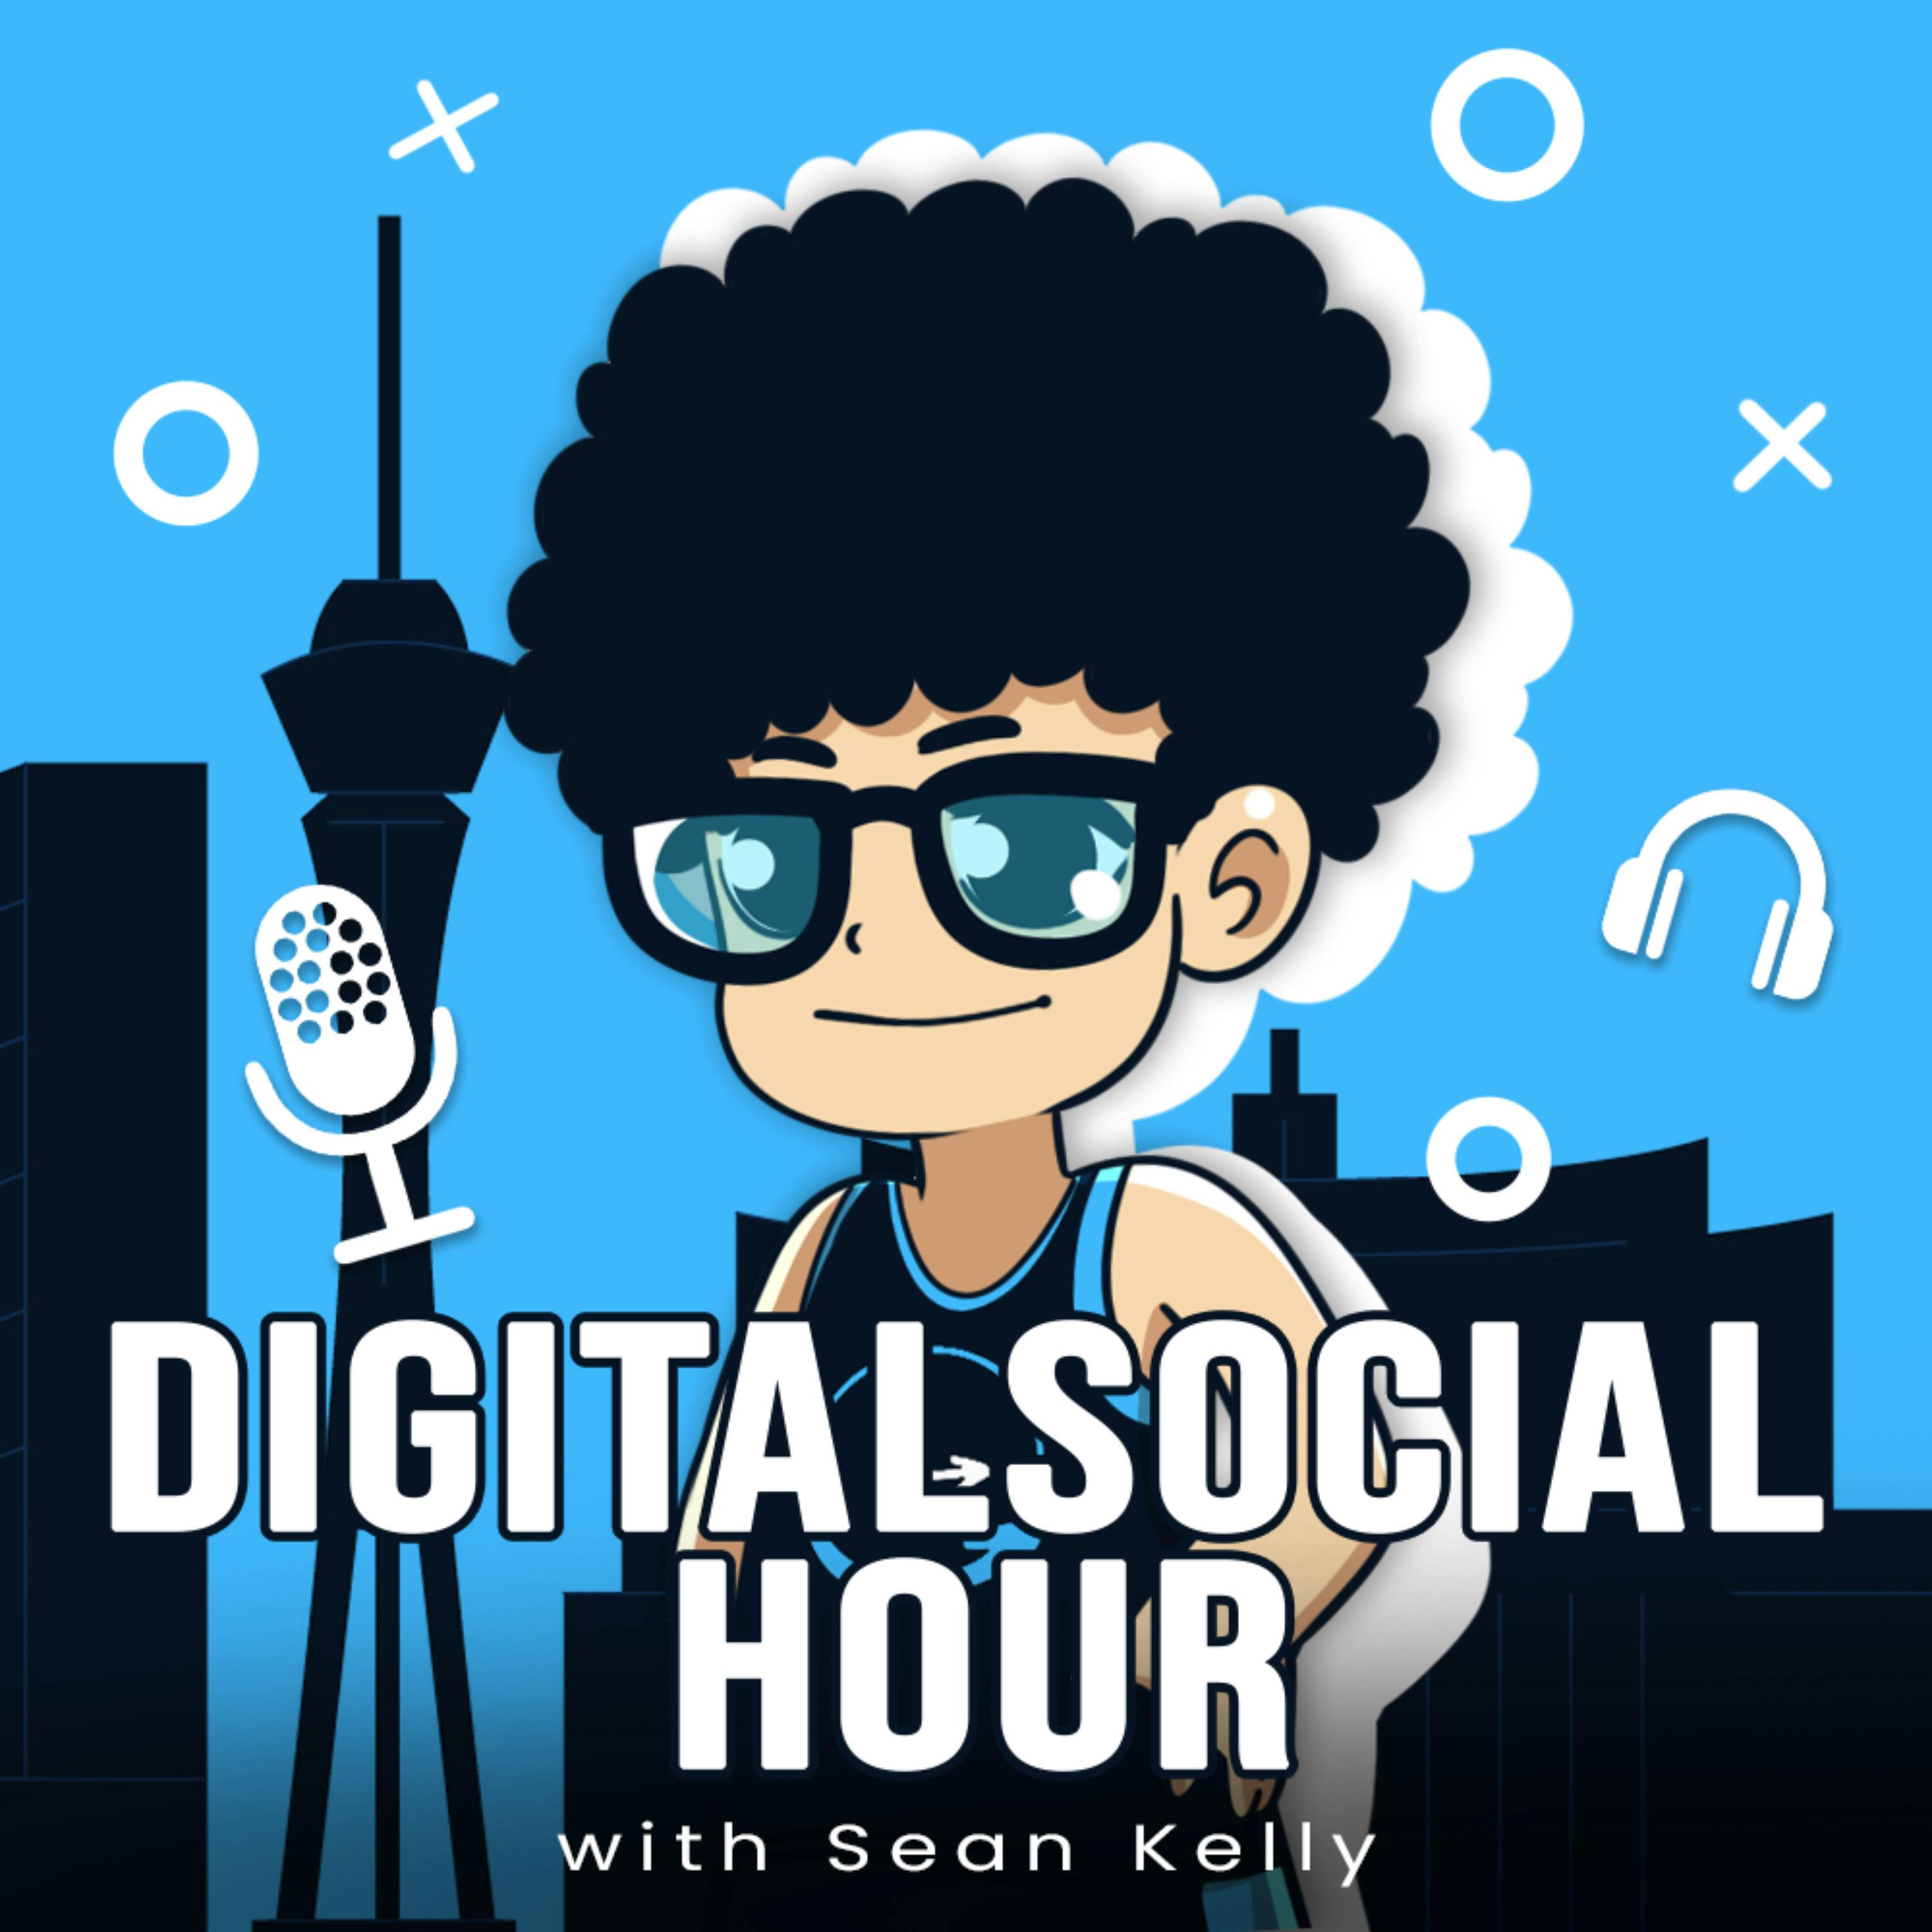 Pro Dunker Reveals How to Get a 50 Inch Vertical Jump | Connor Barth Digital Social Hour #84